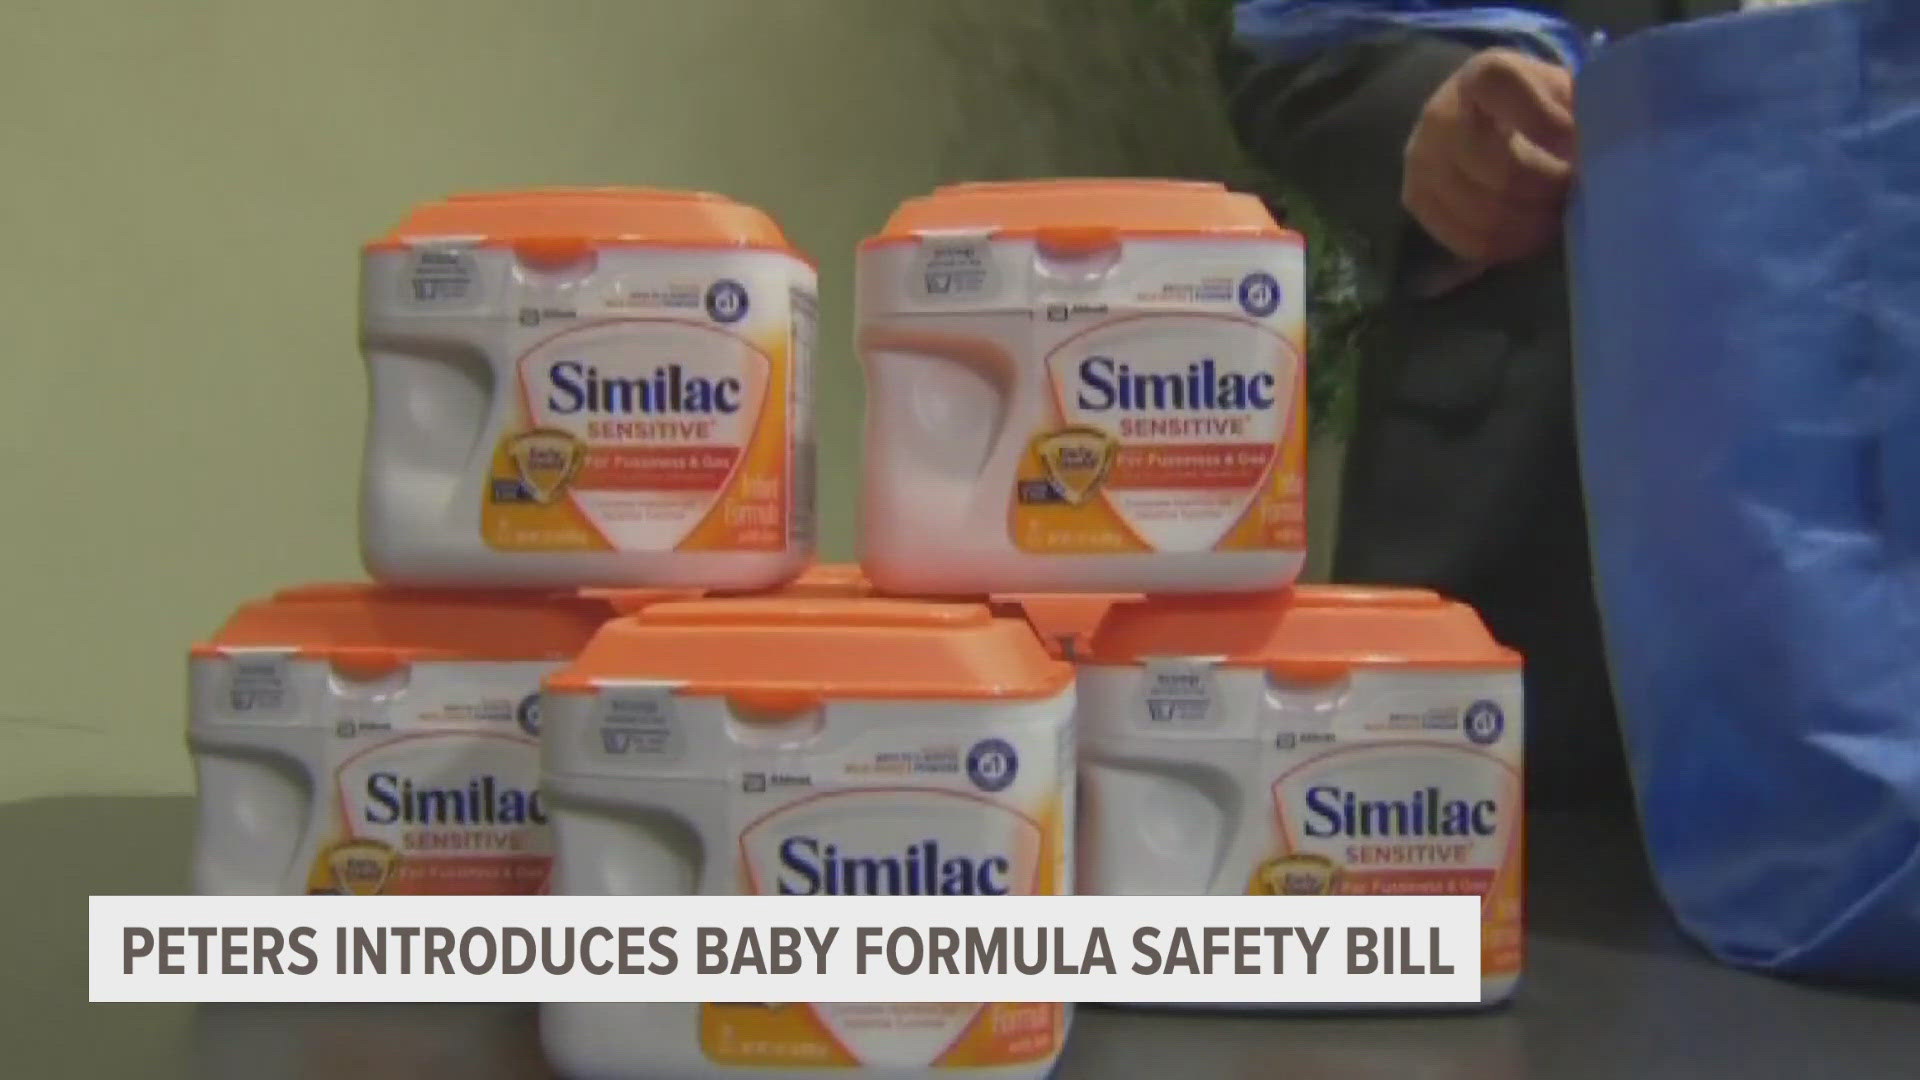 2 years ago, the nation faced widespread shortages of baby formula after a potentially deadly bacteria was detected at a major facility here in Michigan.